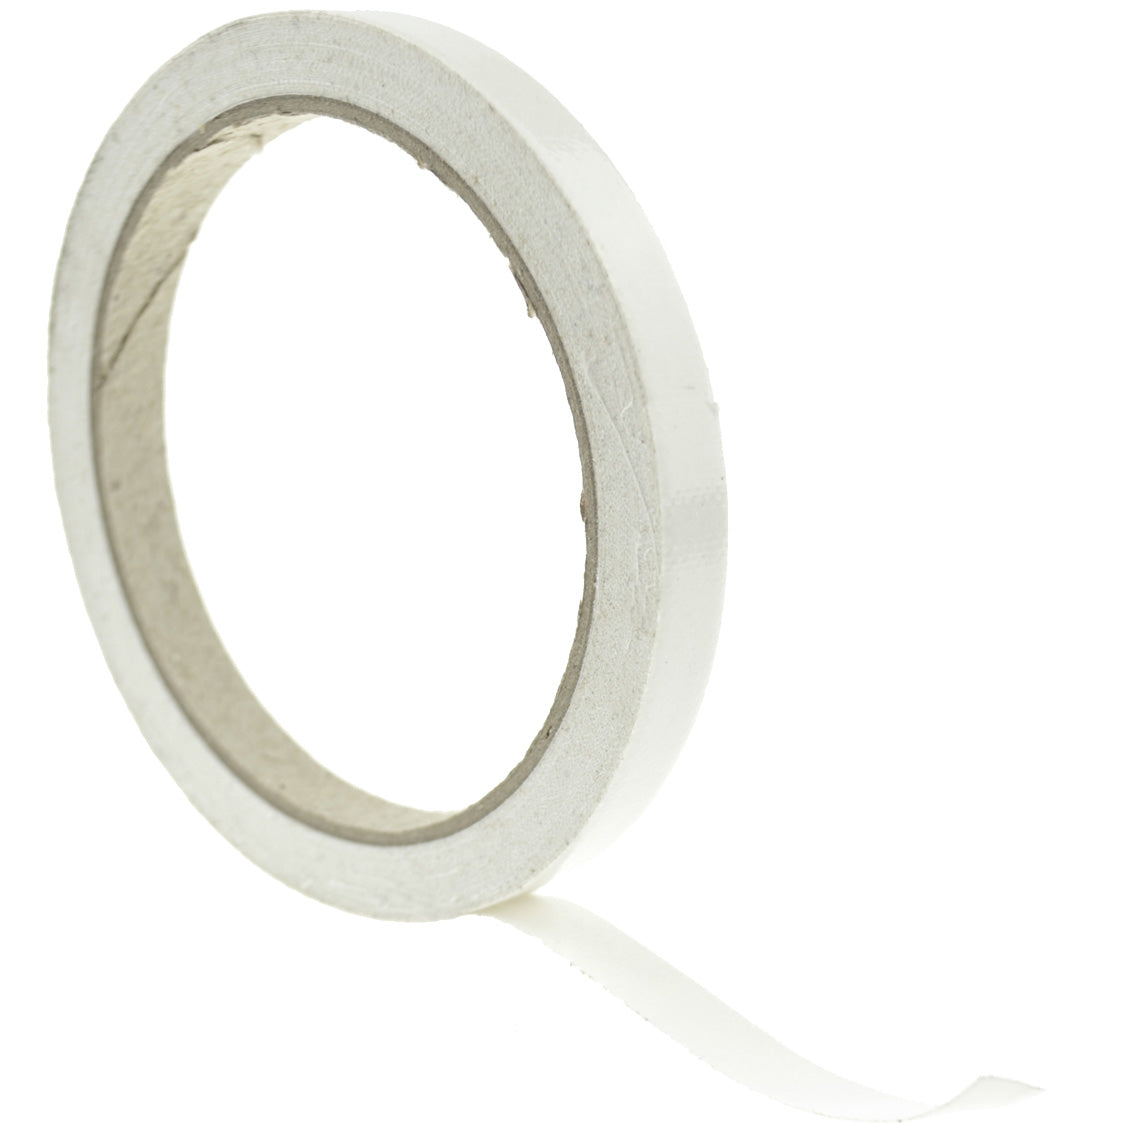 1cm (White) High Strength Adhesive Single Sided Duct Tape Carpet Tape, Strong Water Resistant Tape